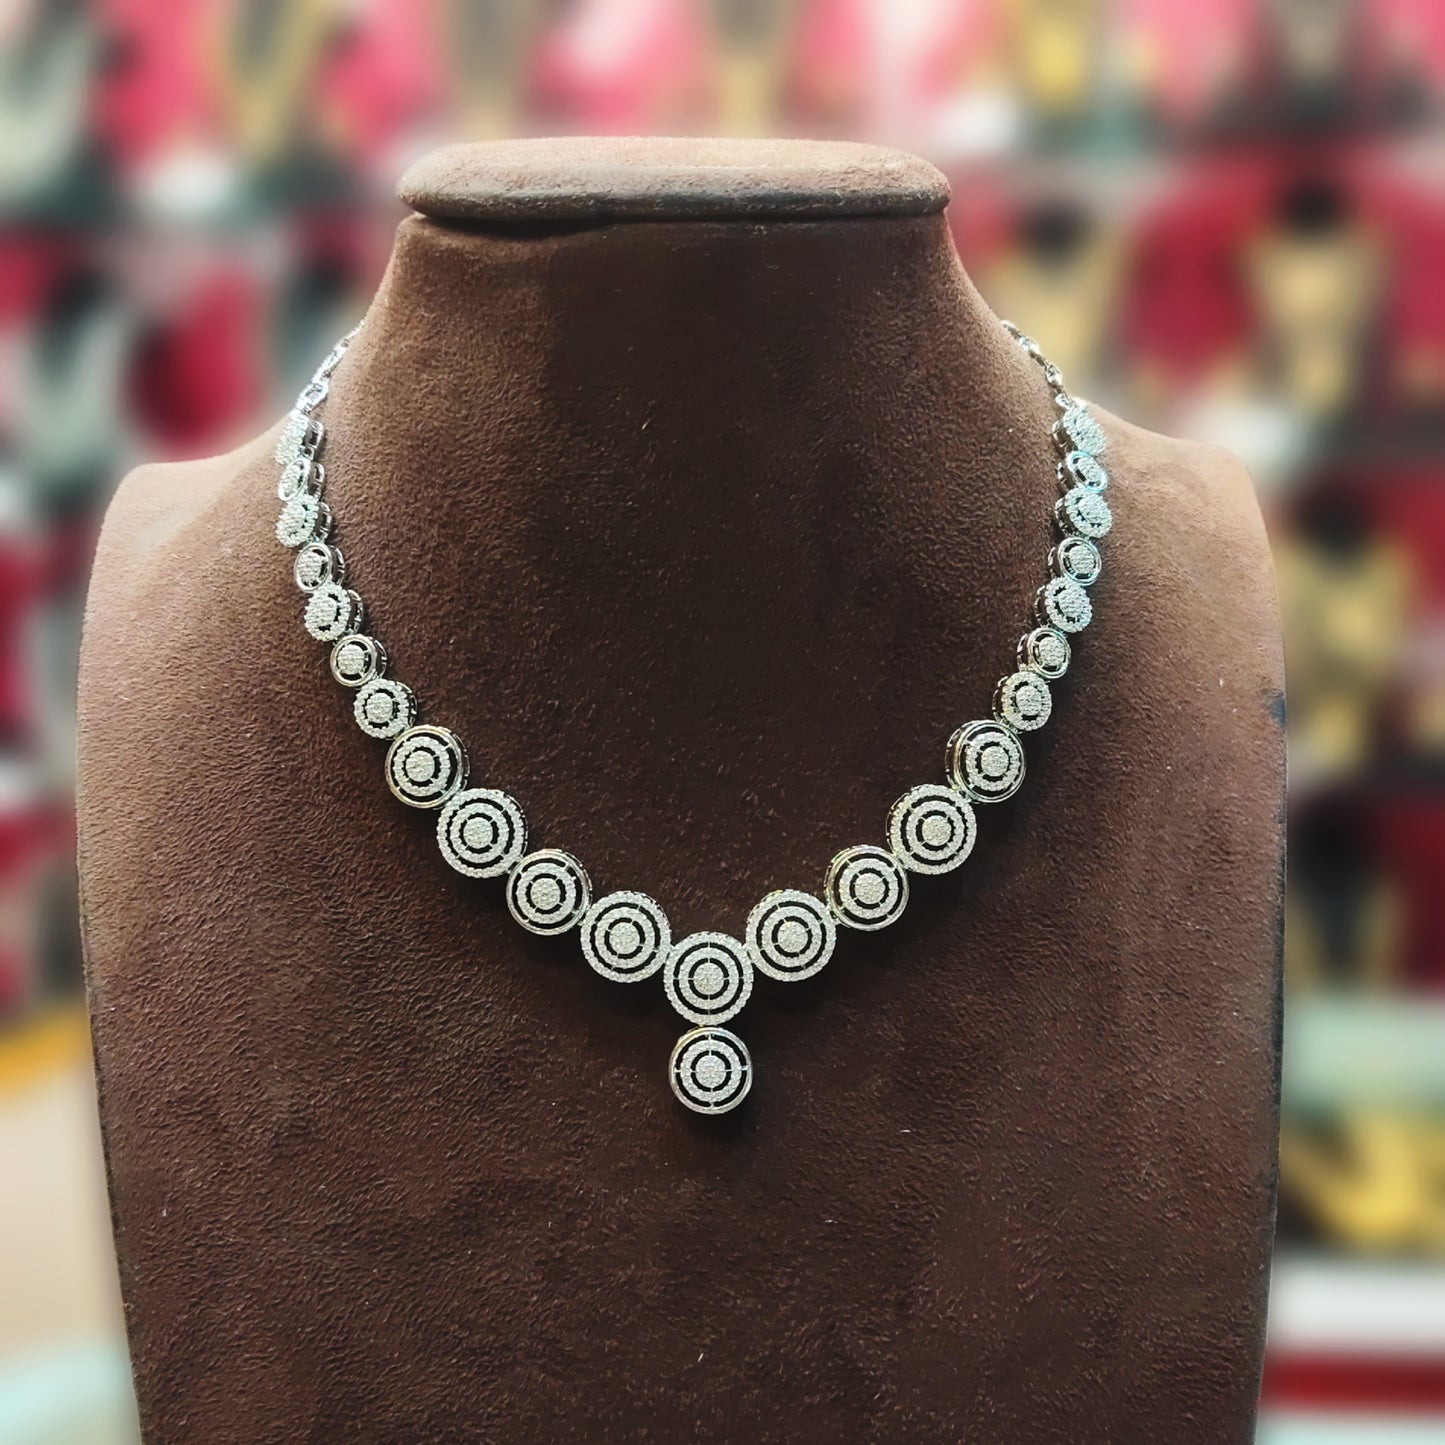 "Dazzling Elegance: Embellish Your Look with Asp Fashion Jewellery's Silver Tone American Diamonds Necklace Set 95239887"